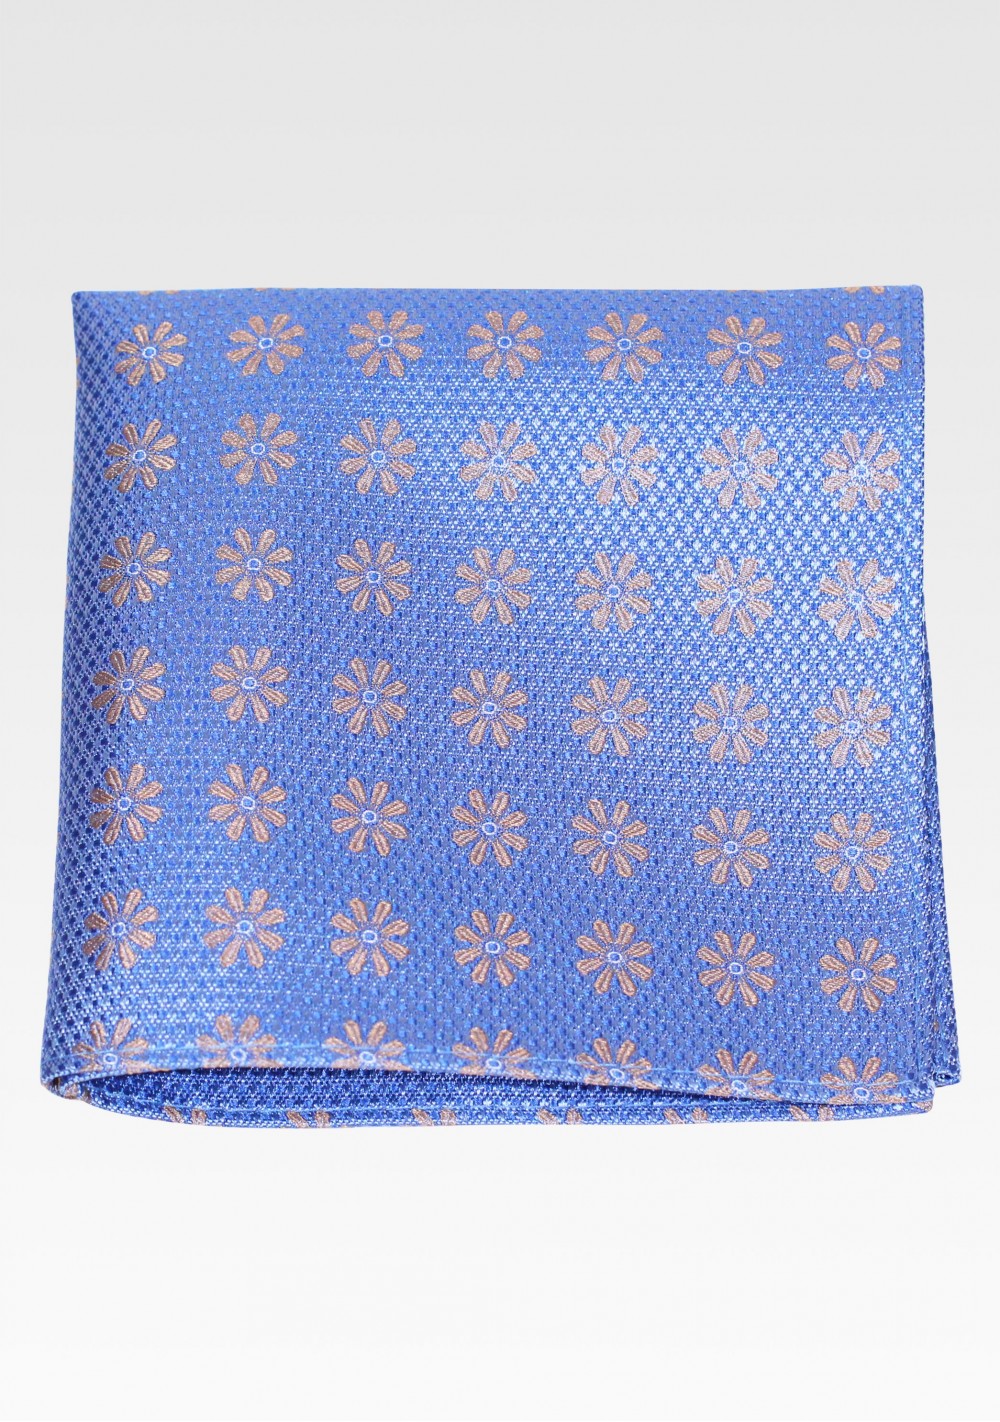 Sapphire Blue and Gold Silk Pocket Square